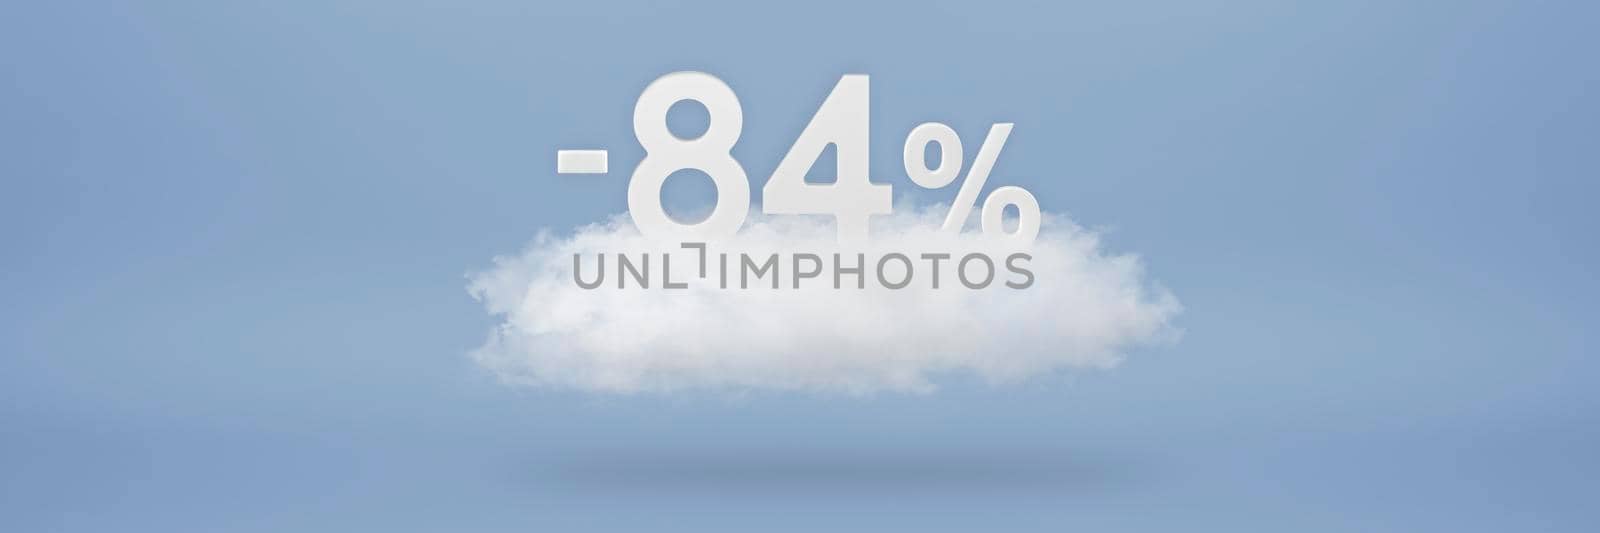 Discount 84 percent. Big discounts, sale up to eighty four percent. 3D numbers float on a cloud on a blue background. Copy space. Advertising banner and poster to be inserted into the project by SERSOL